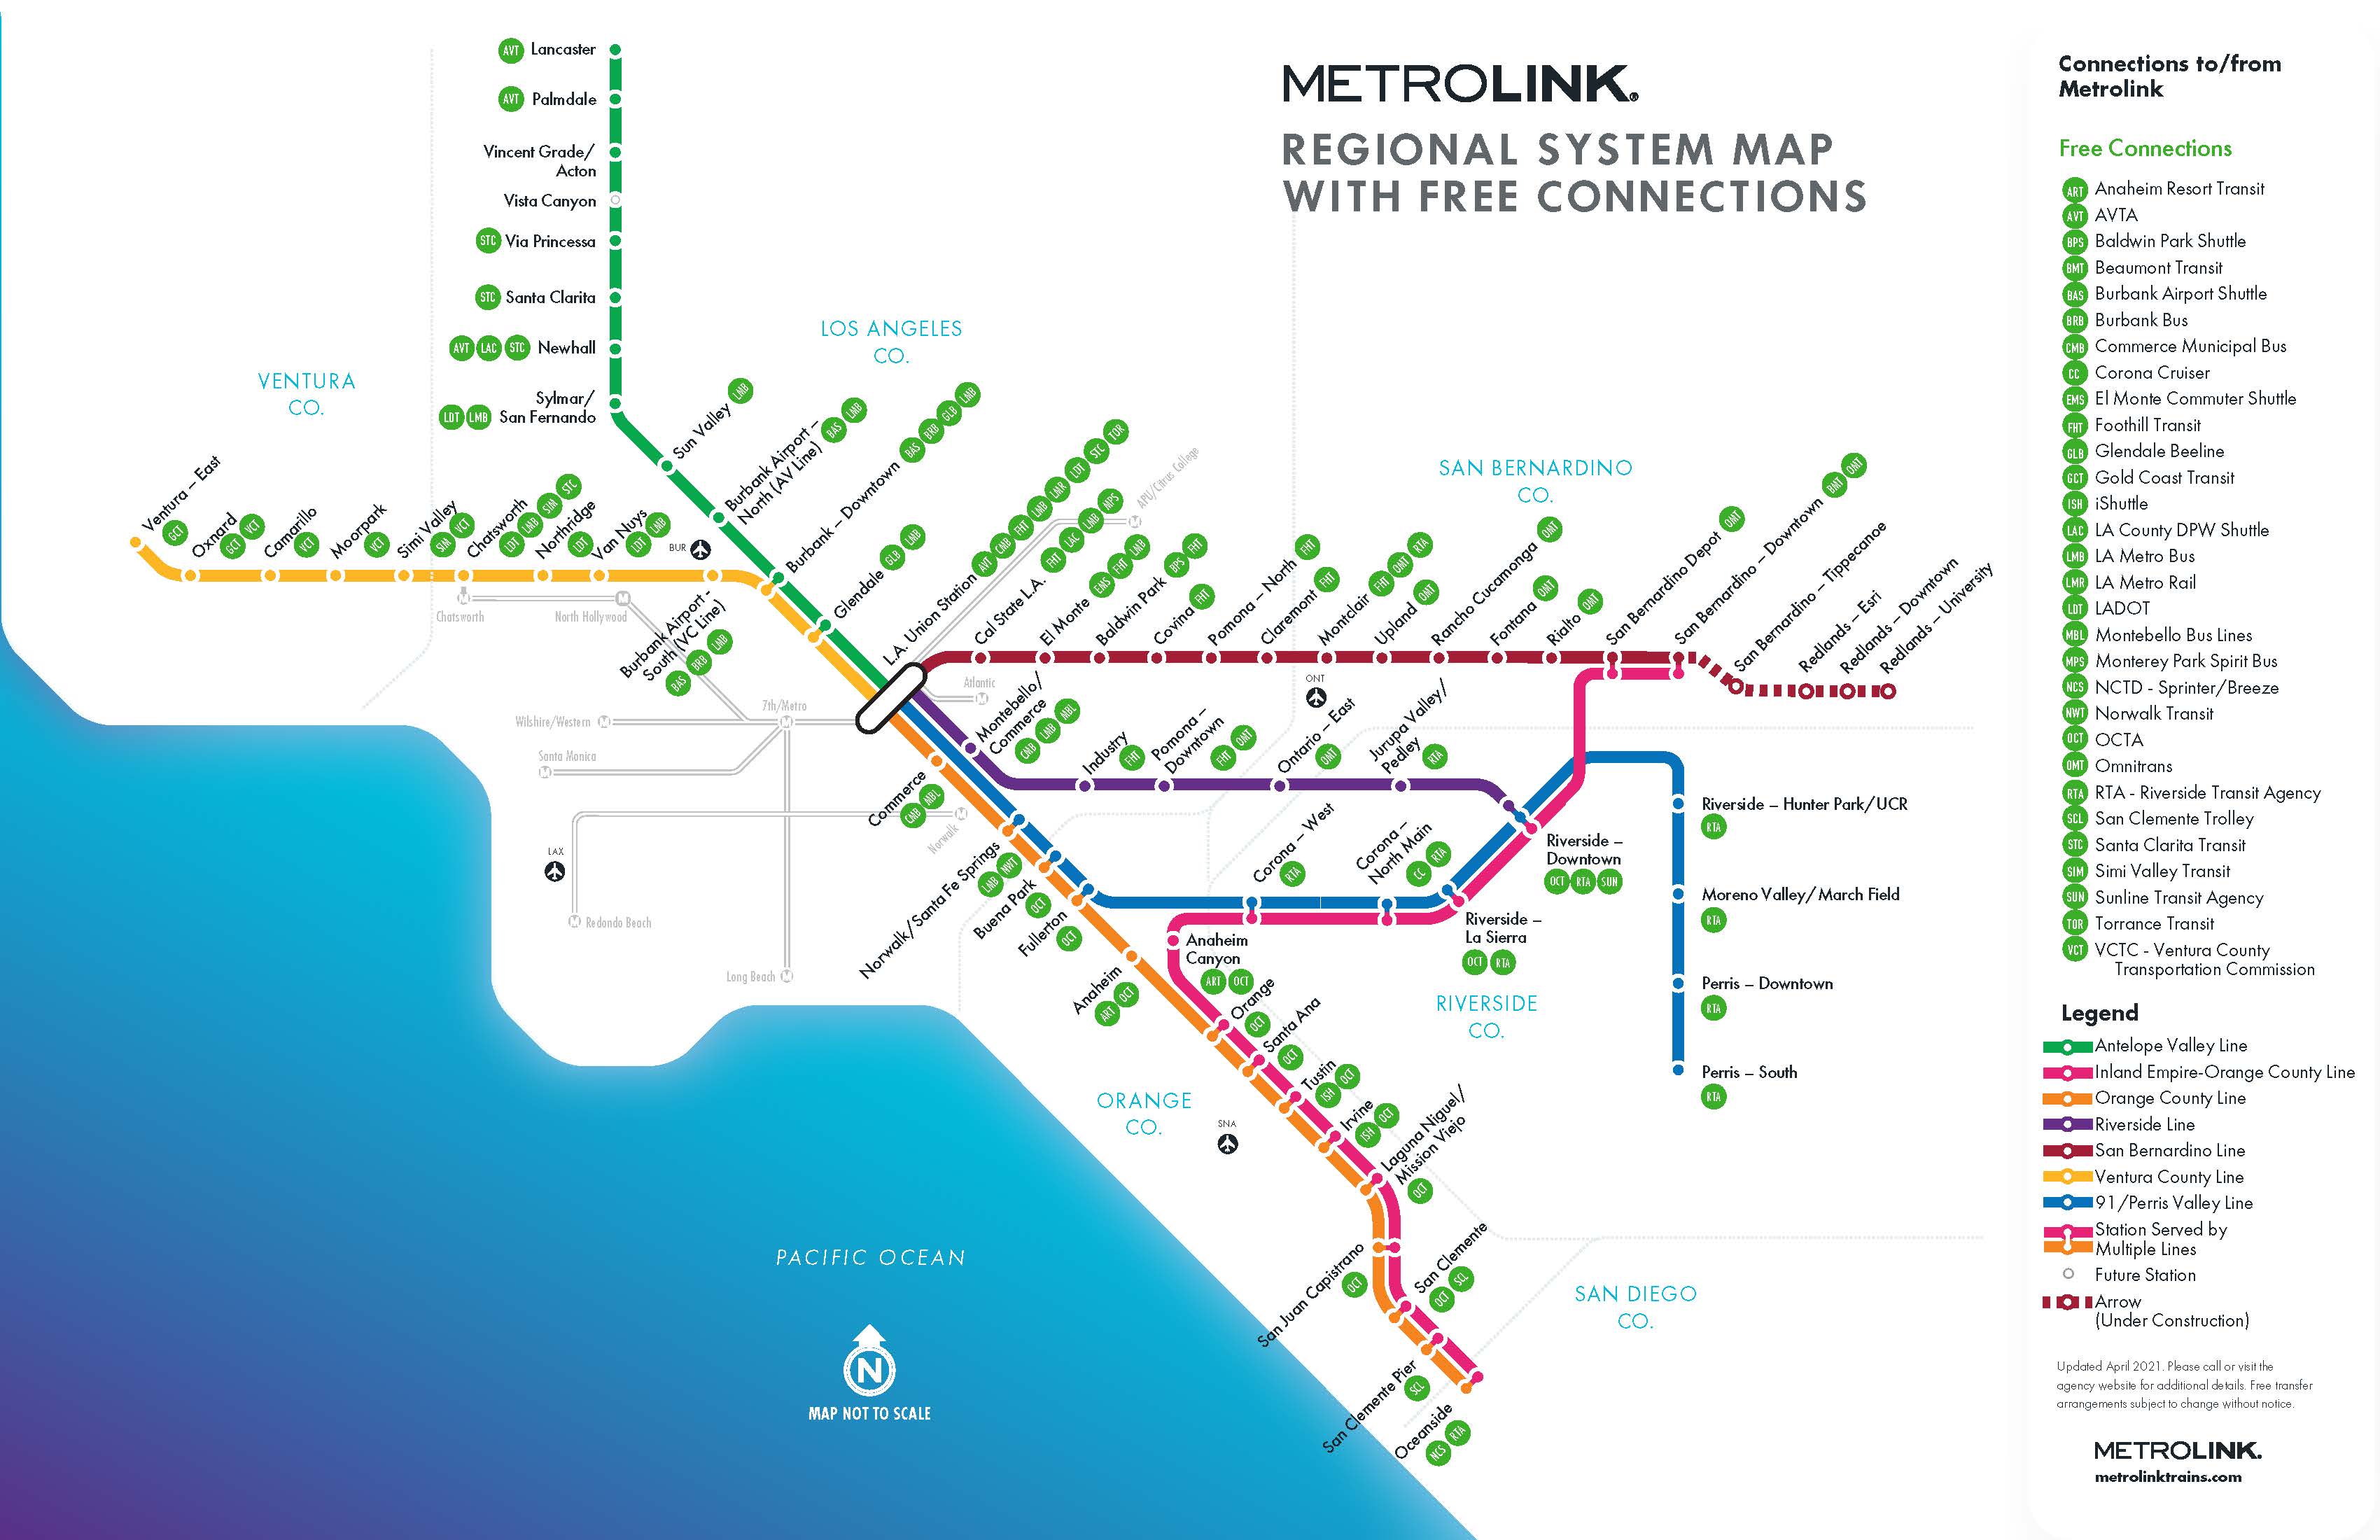 Metrolink Connectivity Map_FreeConnections_black_logo_May2021 (2).jpg